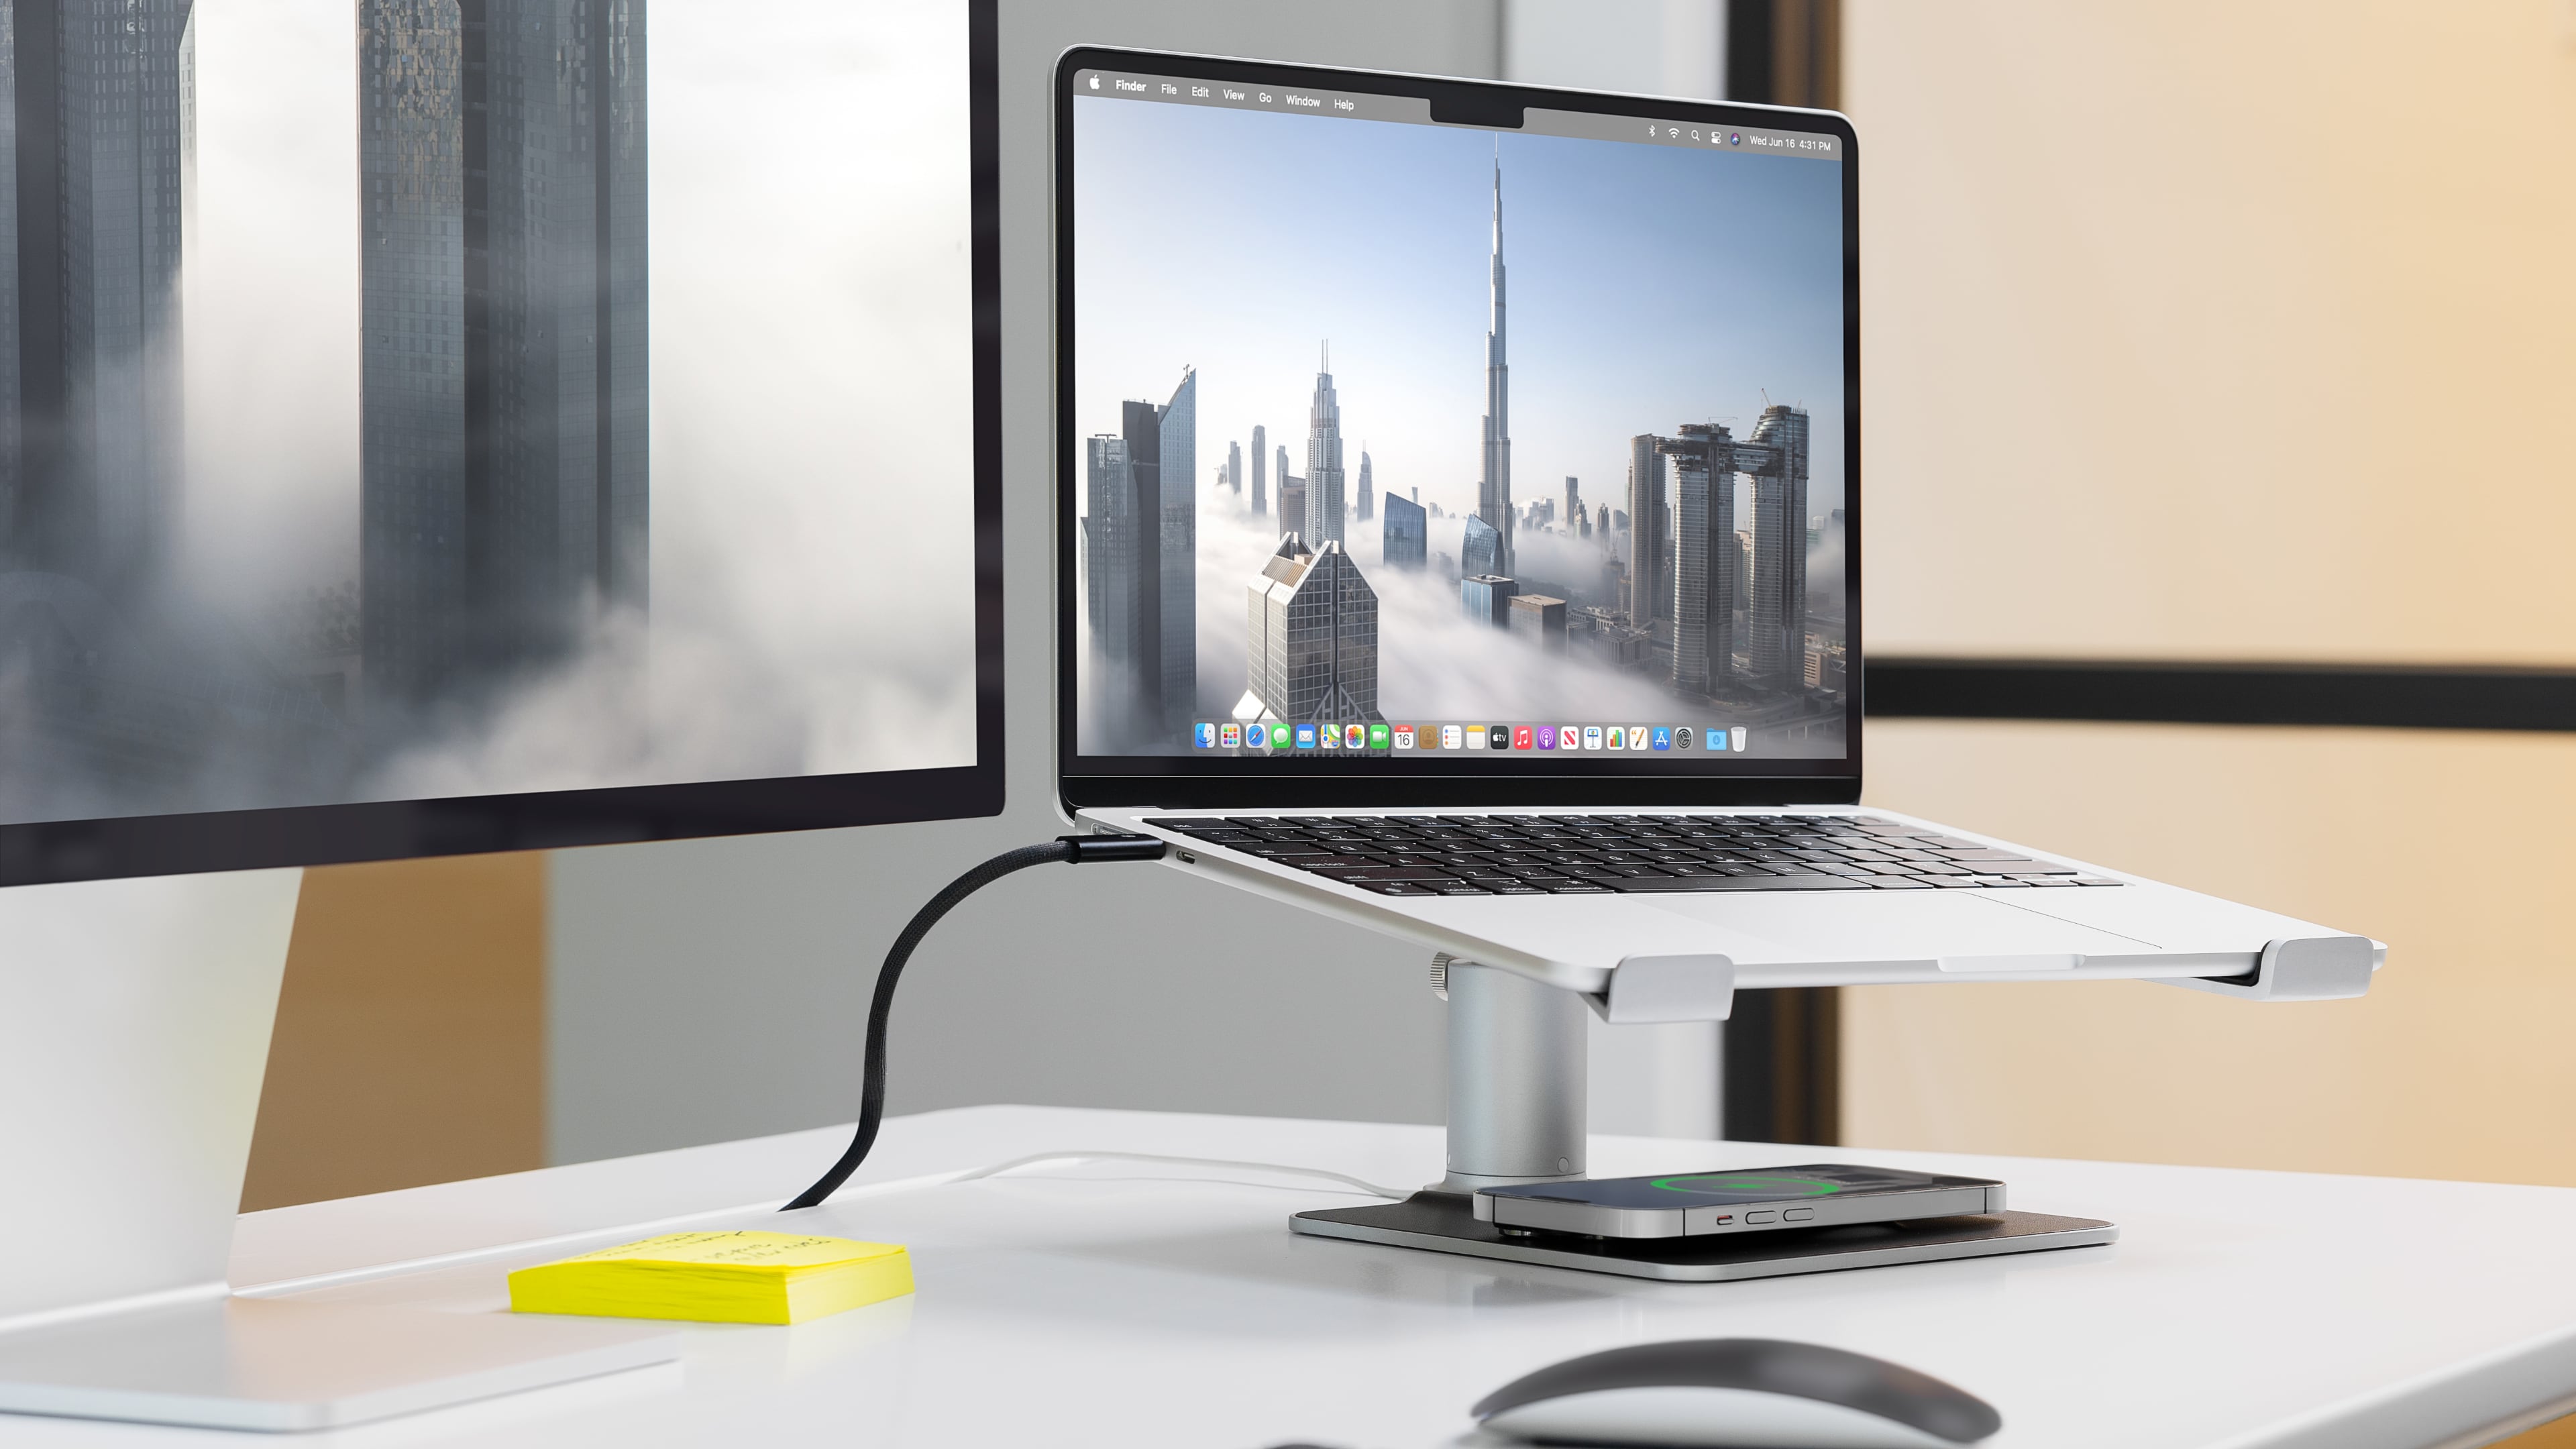 MacBook Pro on twelve South's HiRise Pro stand, with an iPhone charging on its base